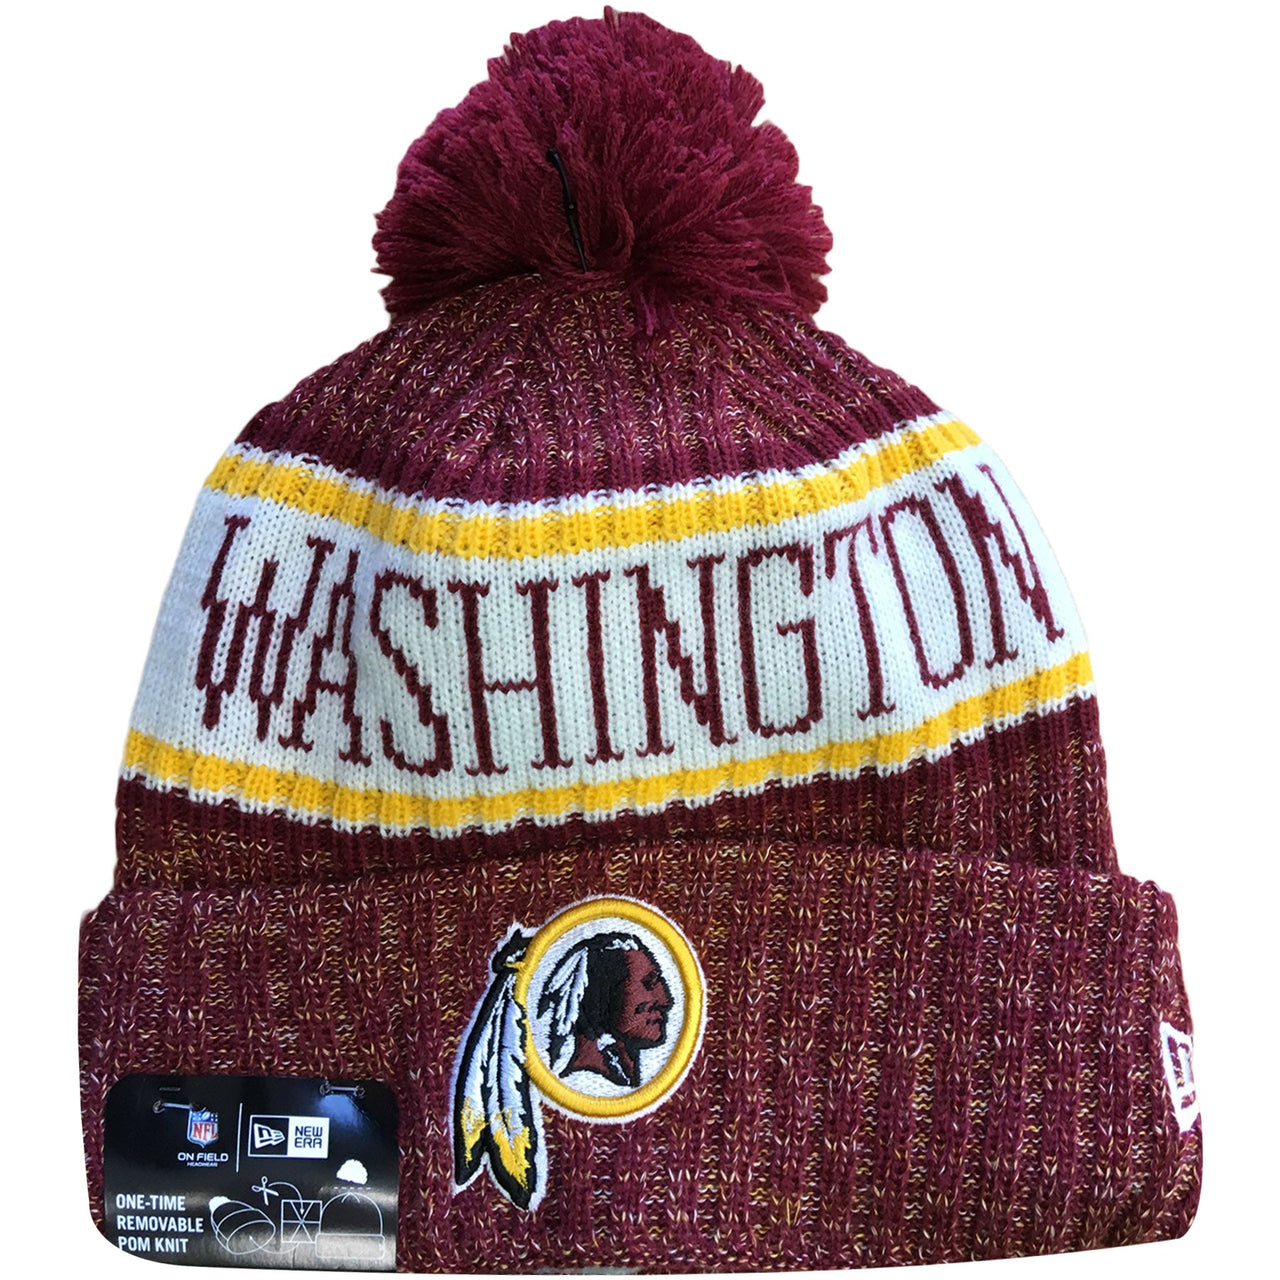 Embroidered on the front of the 2018 Washington Redskins Cold Weather On-Field Sideline Pom Beanie is the Washington Redskins logo embroidered in white, yellow, and maroon. Across the crown of the 2018 Washington Redskins On-Field Sideline Beanie is the word Washington in maroon